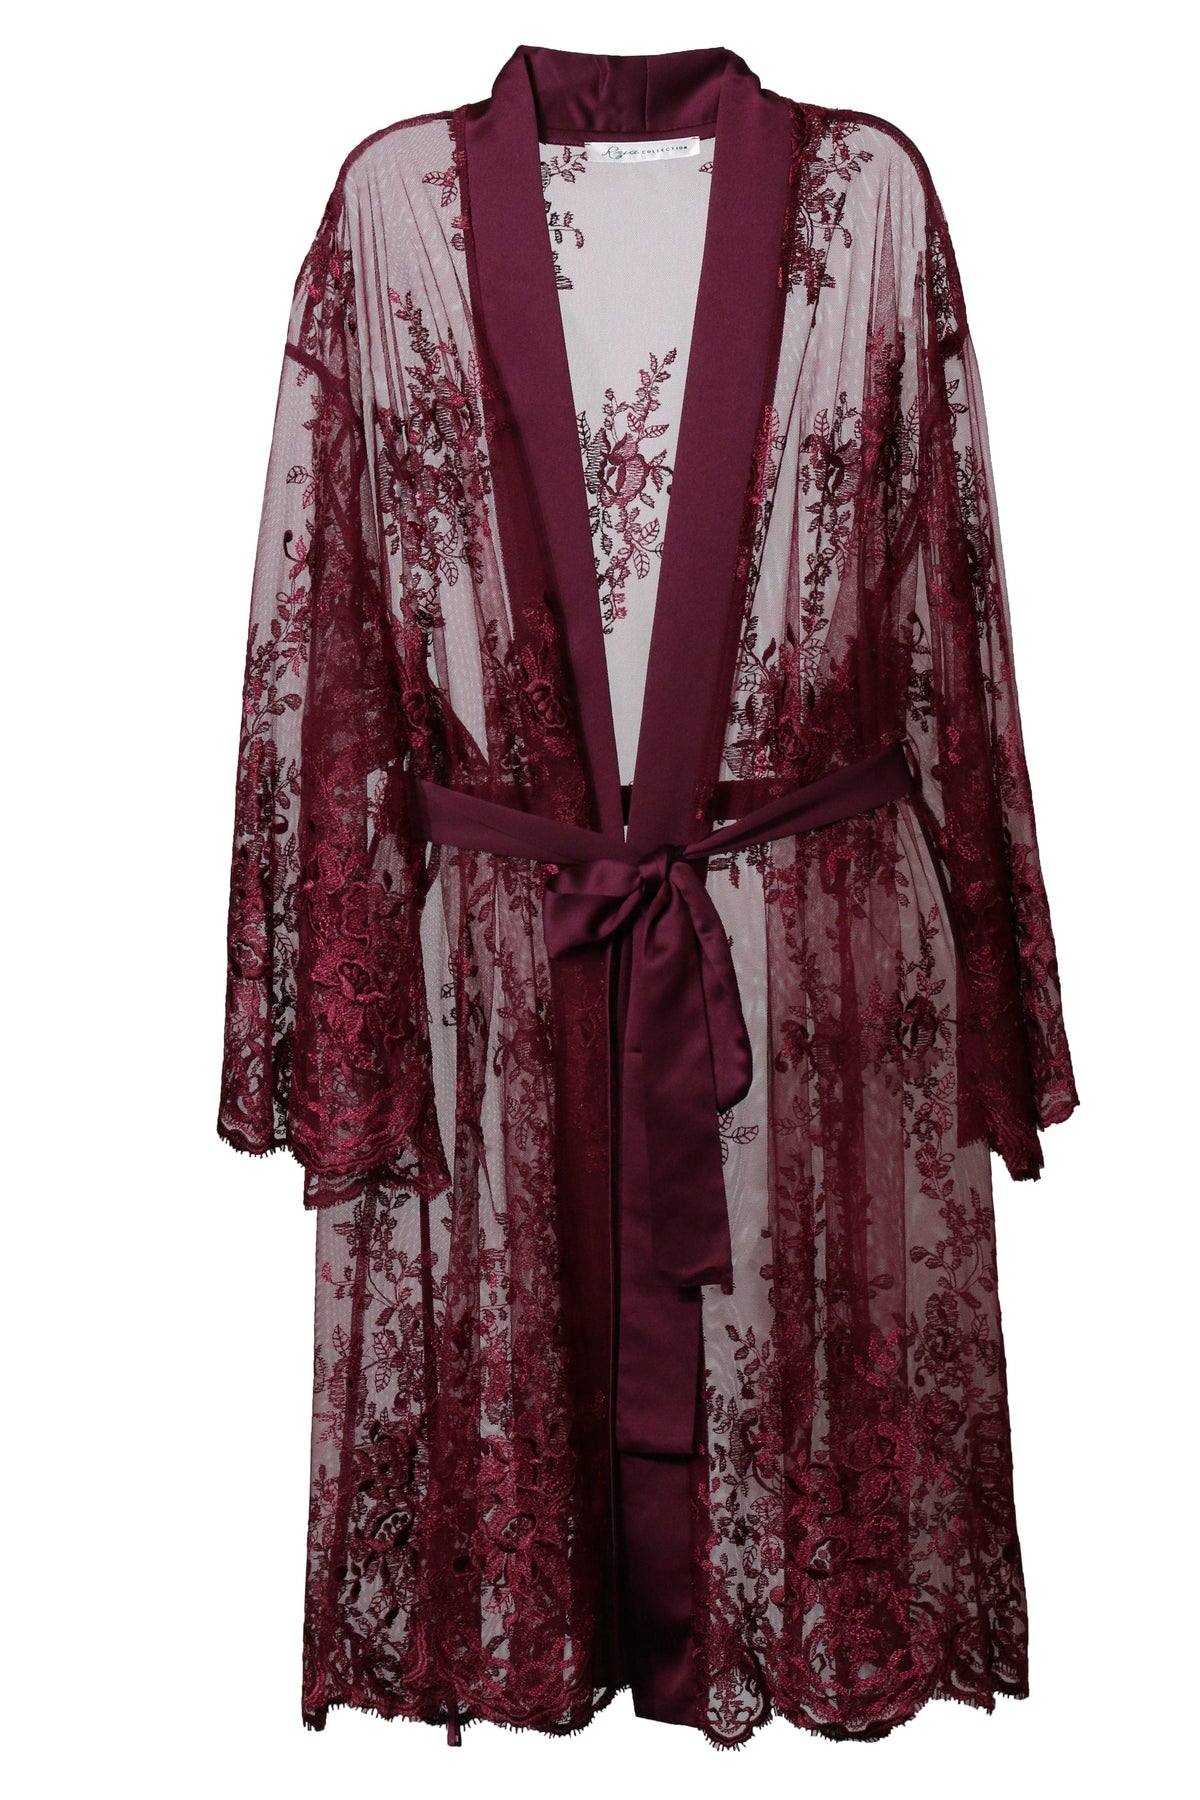 Rya Collection Robes Aubergine / XS/S Darling Cover Up- Aubergine